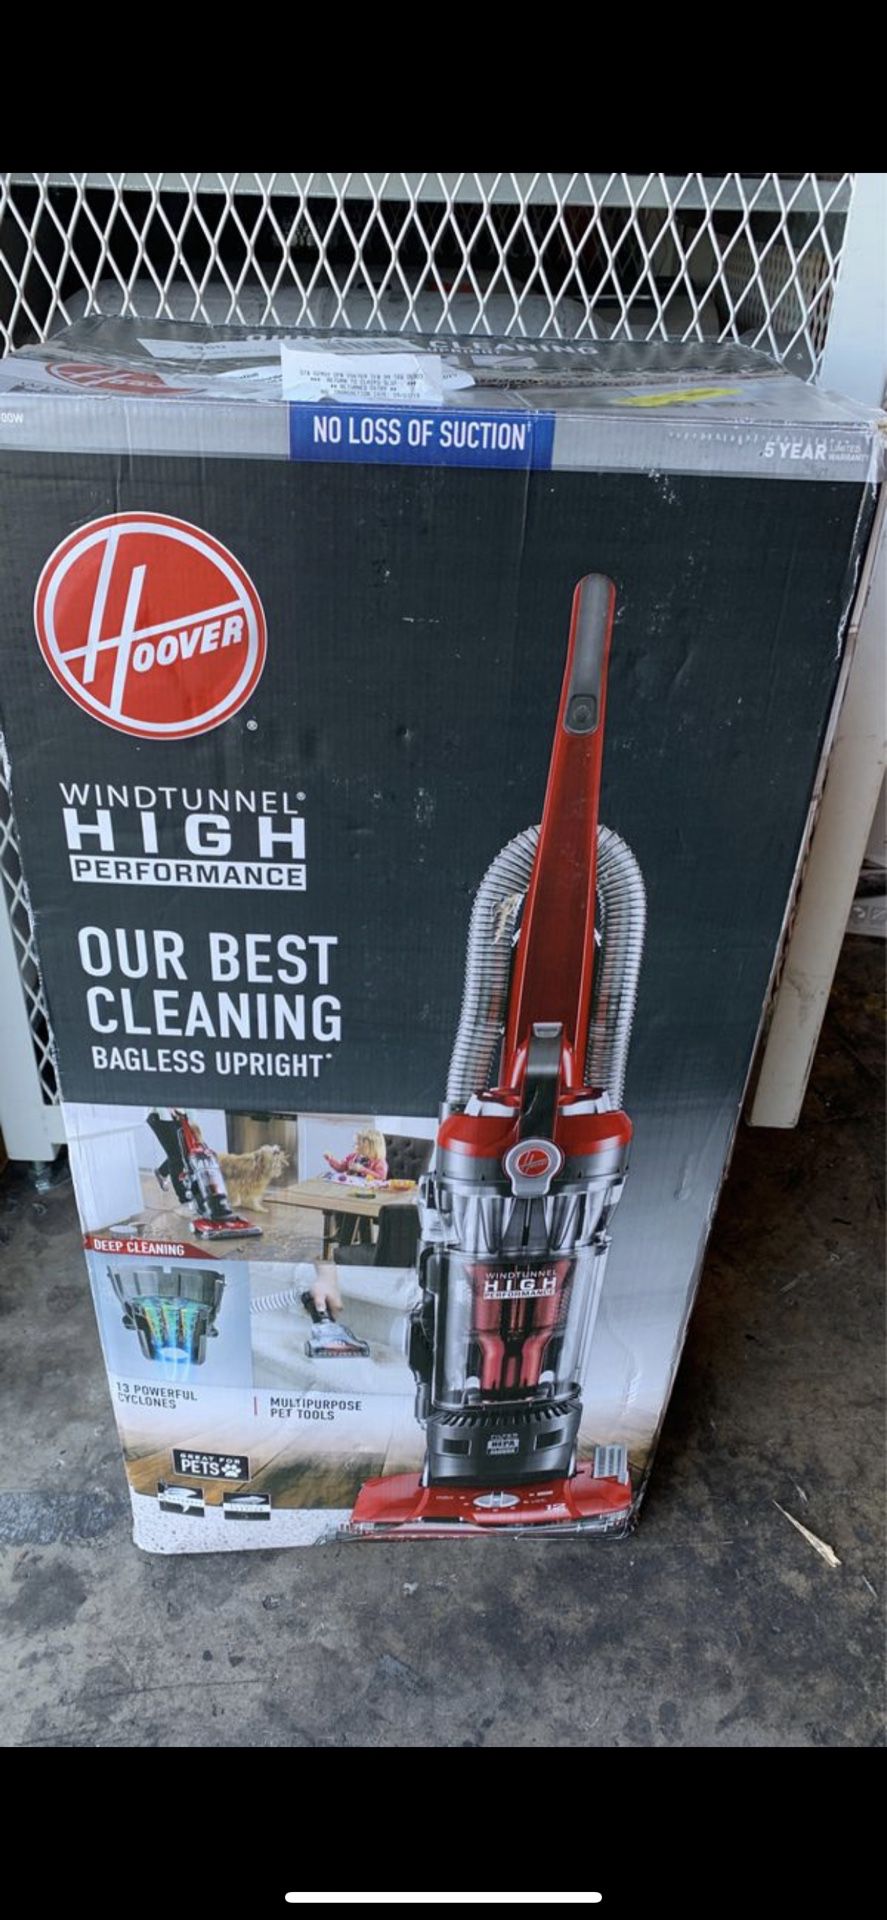 Hoover - WindTunnel 3 High Performance Pet Bagless Upright Vacuum cleaner